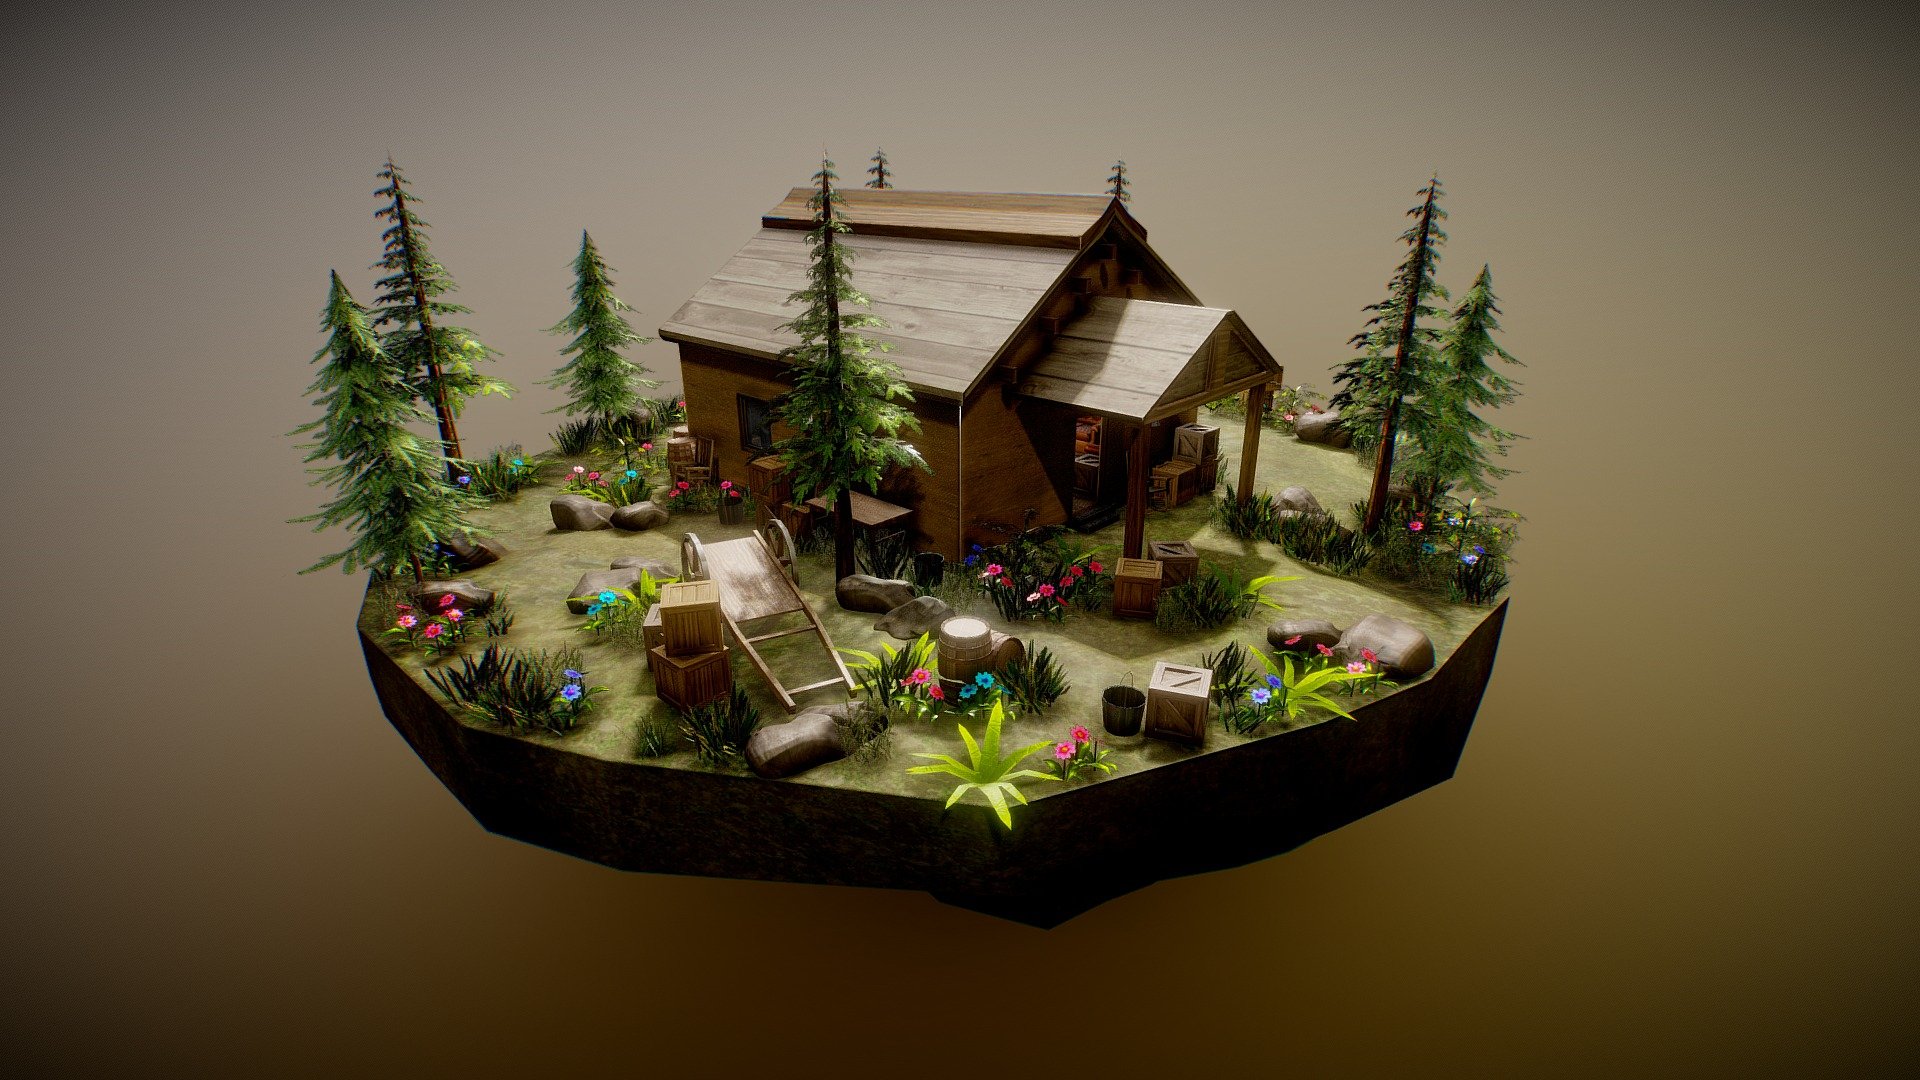 Realistic Modern Rural Cabin 2 Asset Package is a woodlands cabin style asset package containing a great selection of assets used in a detailed and realistic outdoor cabin scene!

Inside this woodlands cabin scene you'll find a variety of assets ranging from the cabin to the old, mostly wooden furniture for a kitchen, patio and living room, an attic, a cart, lots of props and clutter such as bottles, buckets, planks, crates and barrels, books, folaige such as plants, trees and grasses and everything in between!

Everything has been carefully designed to deliver a realistic and detailed experience.

This package includes a variety of realistic assets to ensure that your game looks and feels the best that it can!

Try the demo : Download Here

For support email me at : alignedgames@mailbox.co.za

My studio website :

Visit Here - Realistic Modern Rural Cabin 2 Asset Package - Download Free 3D model by Aligned Games (@Johannesnienaber) 3d model